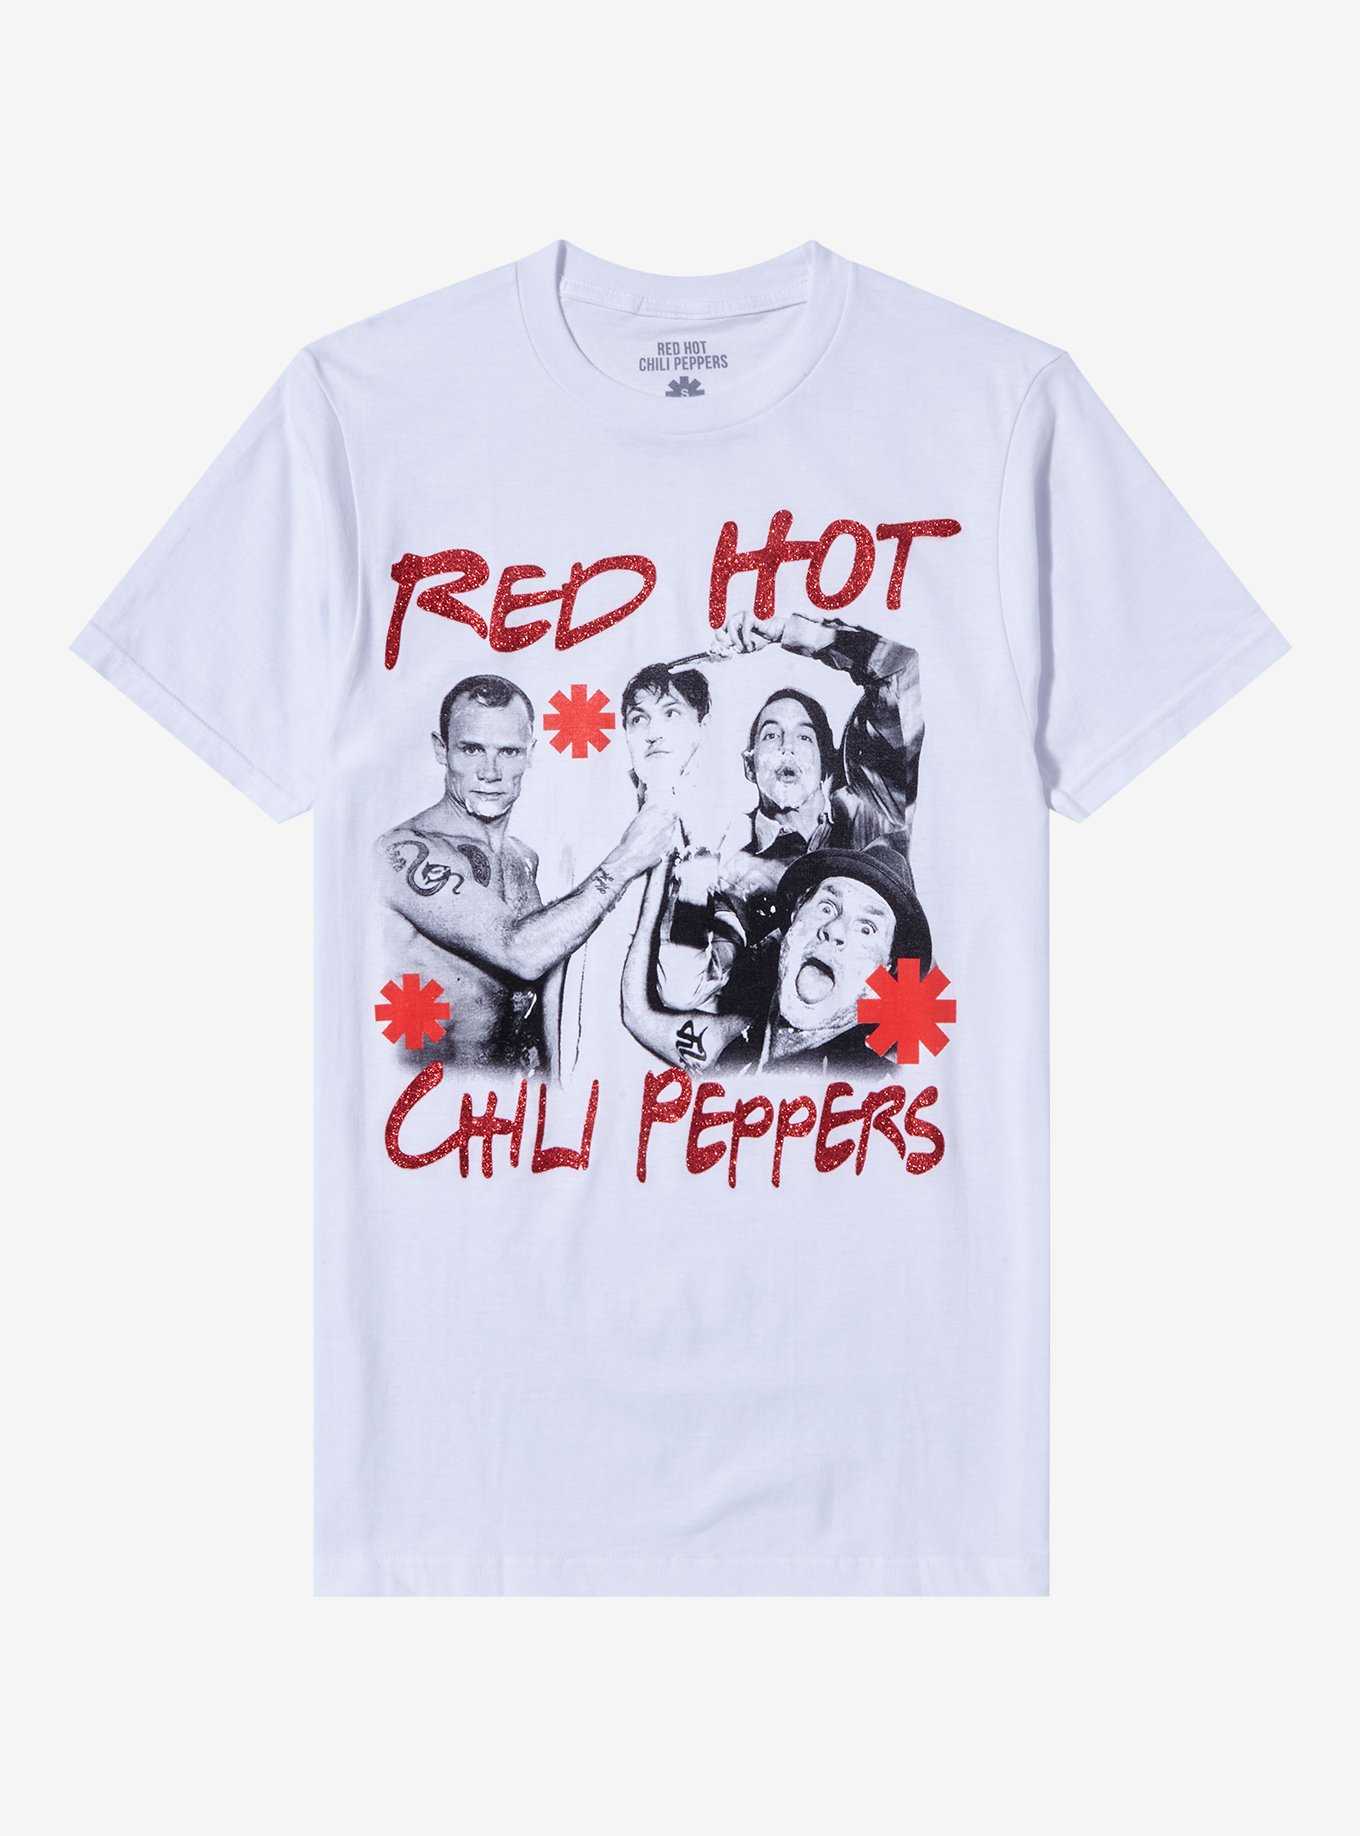 OFFICIAL Red Hot Chili Peppers | T-Shirts Hot Topic & Merch